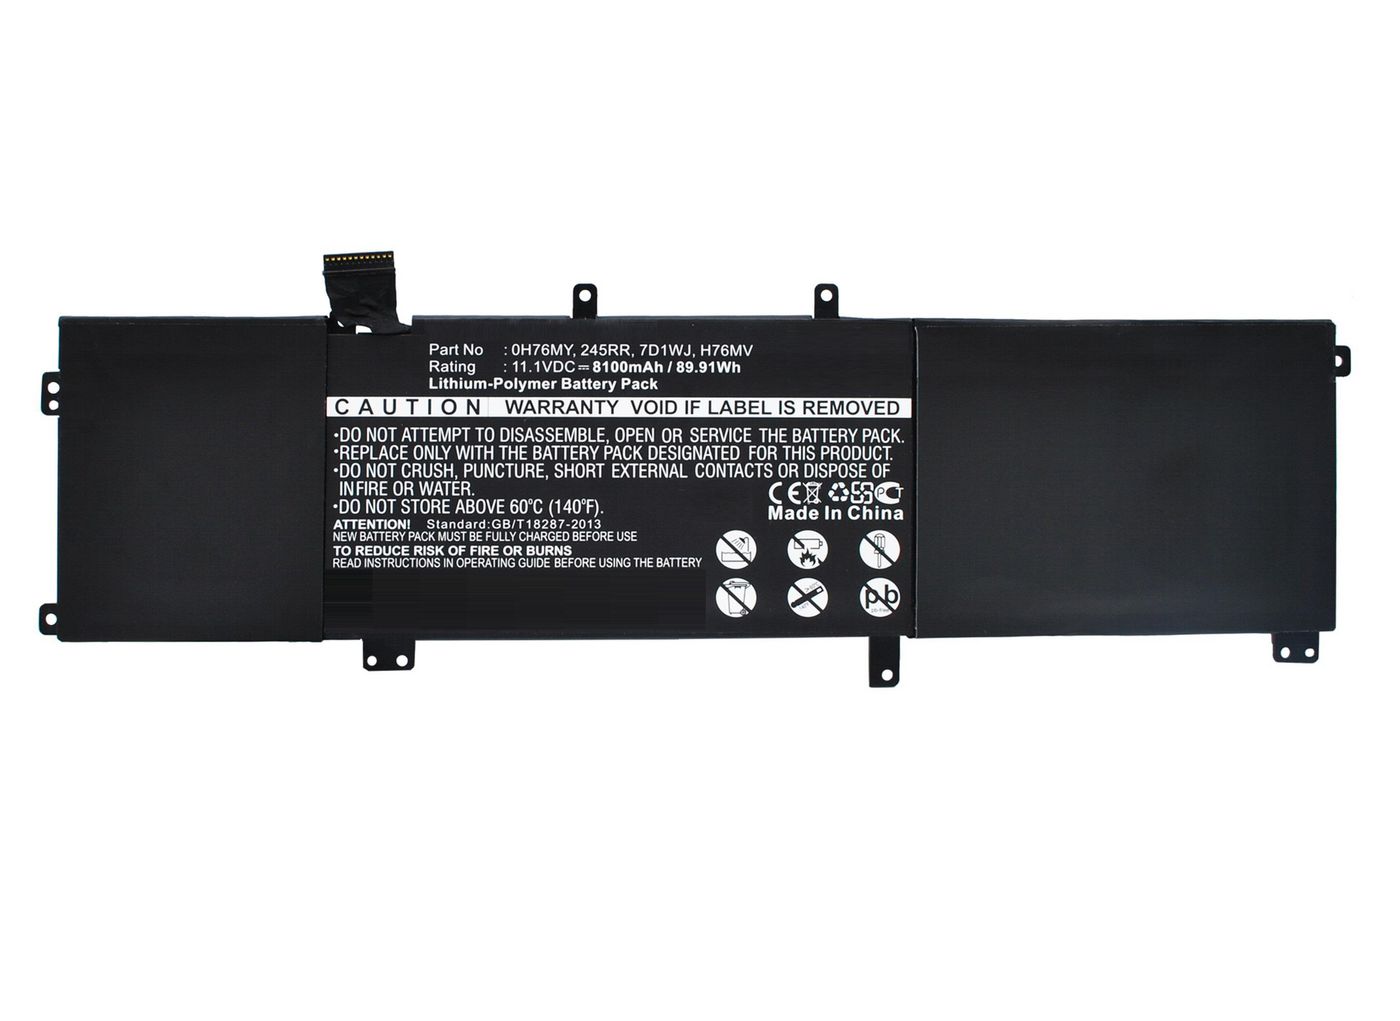 CoreParts MBXDE-BA0059 Laptop Battery for Dell 